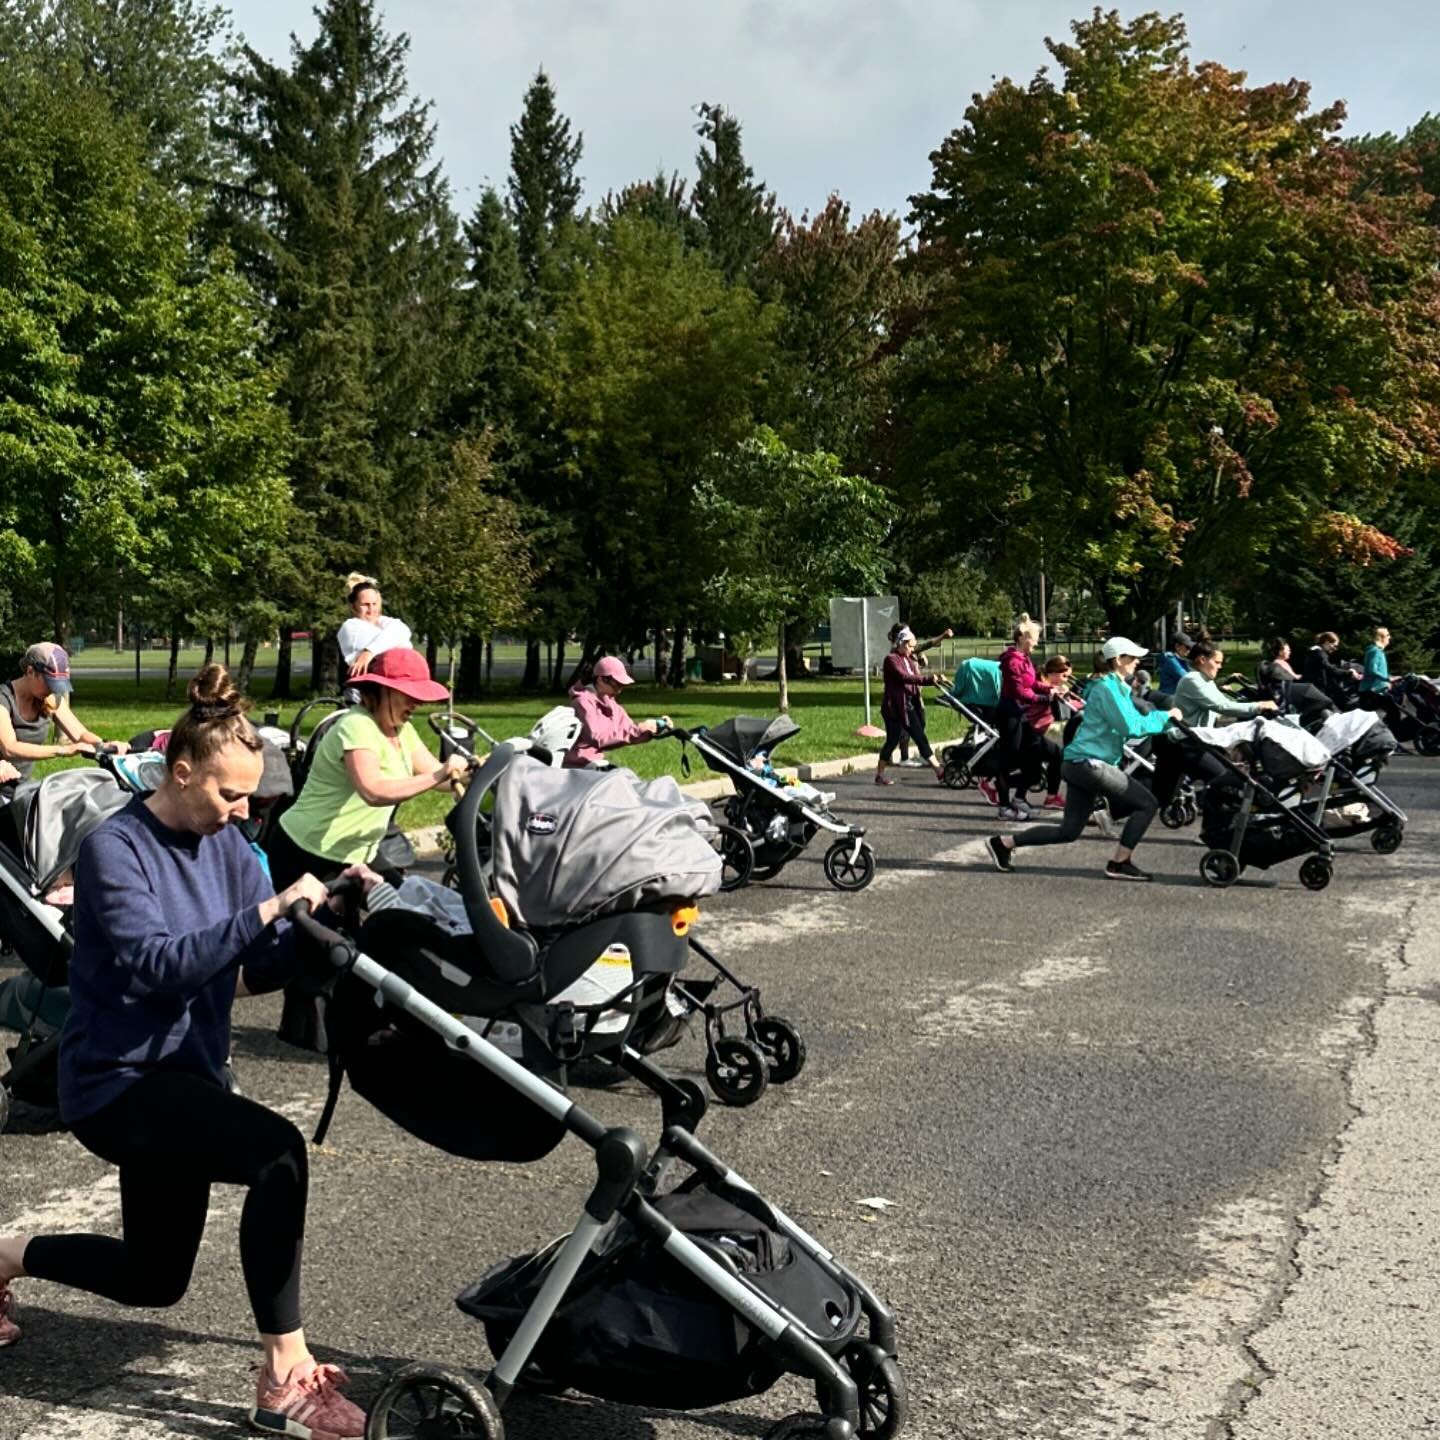 It&rsquo;s SPRING!! Which means one thing&hellip; Our Stroller classes are on the horizon!!

Our next 6 week series of Mama and Baby classes will go on sale on April 5th! Here&rsquo;s the scoop:

☀️ Stroller Strong: Tuesdays @10:30 beginning May 7th 